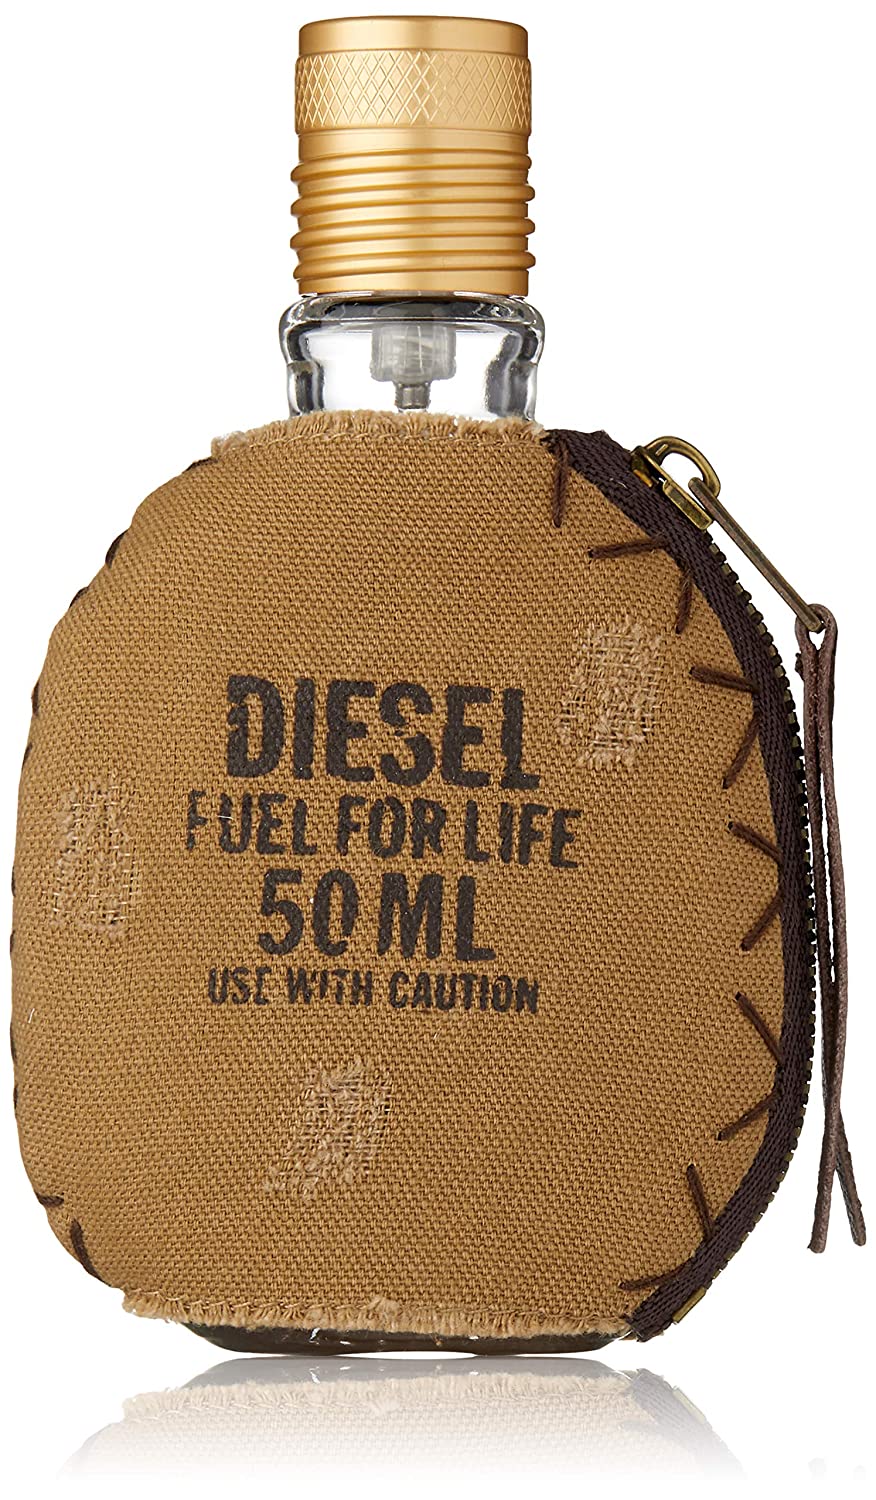 johnny picard inspired by fuel for life DIESEL